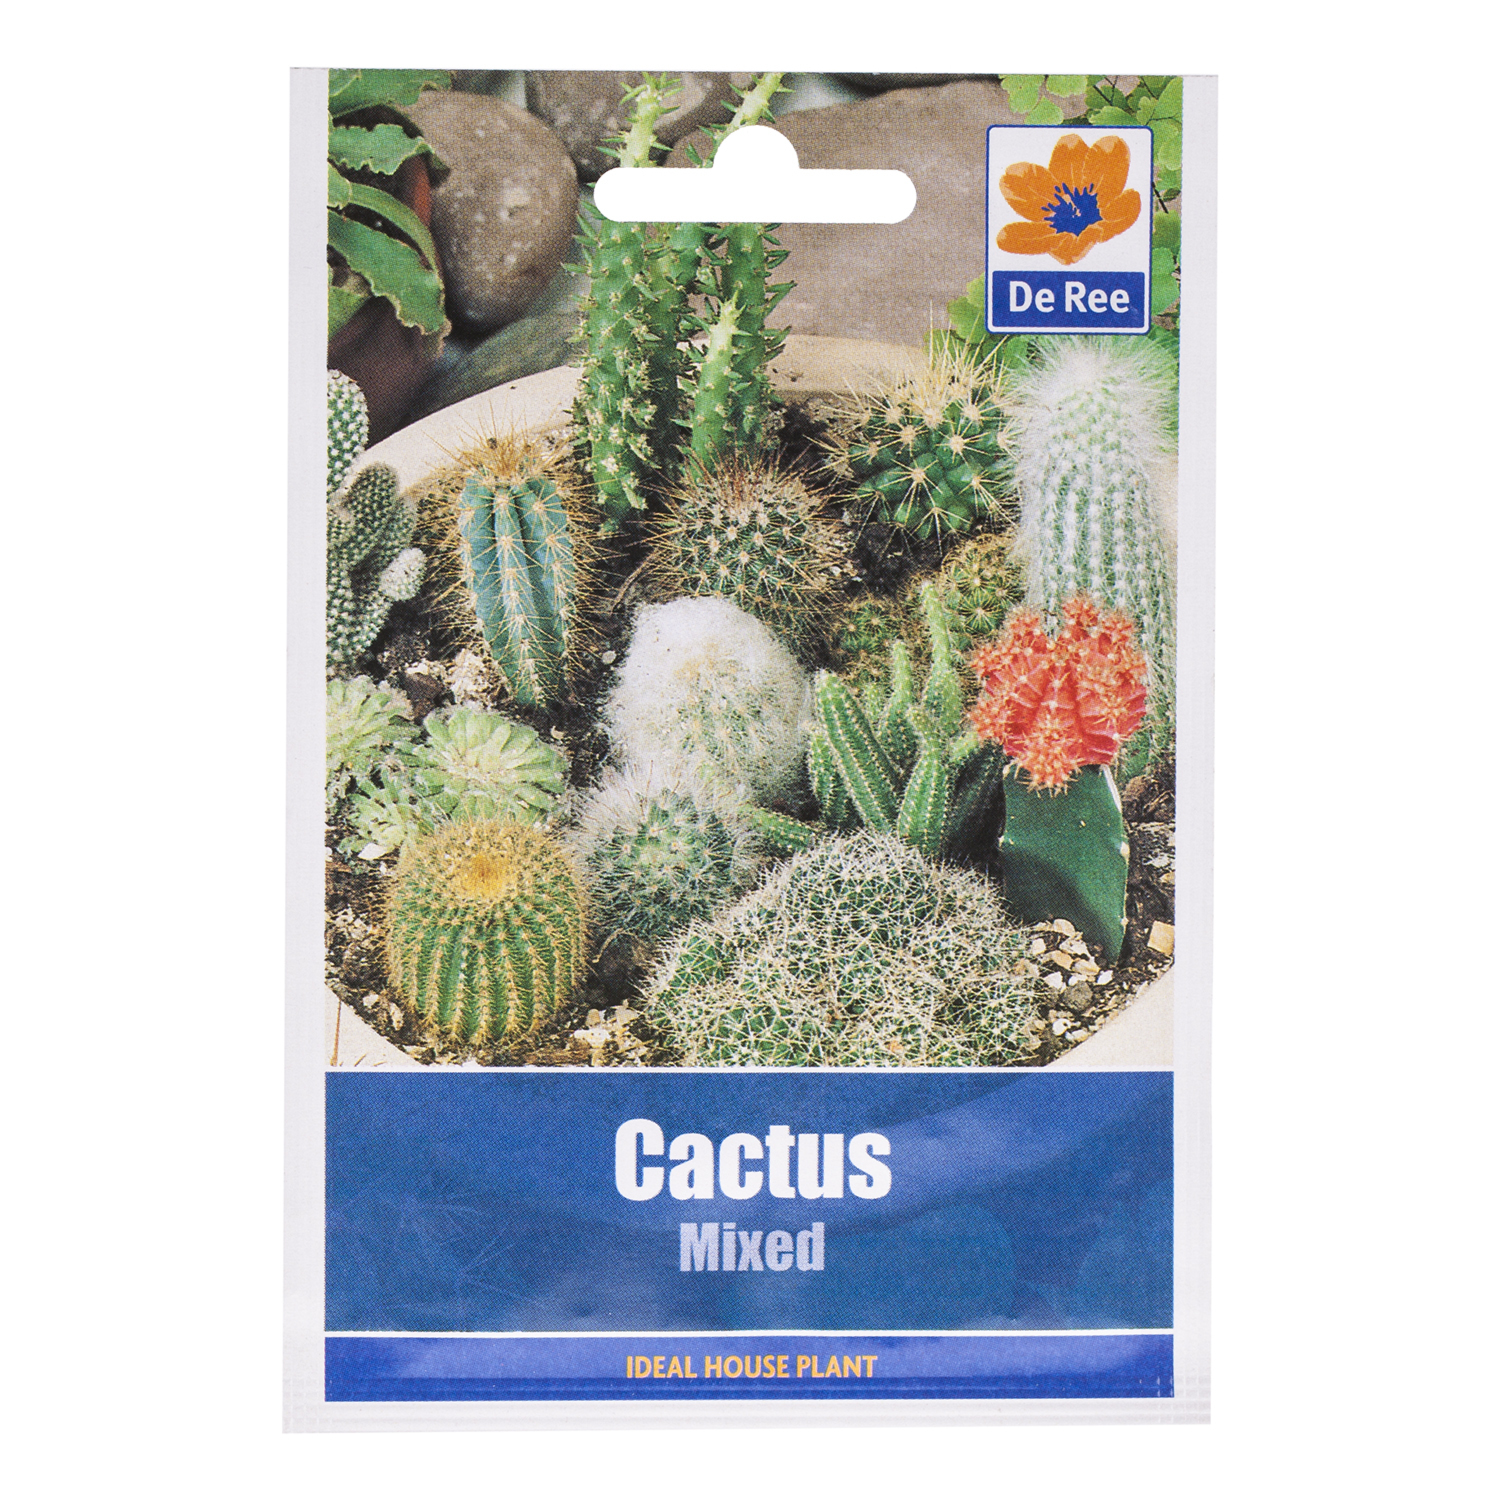 Mixed Cactus Seed Packet Image